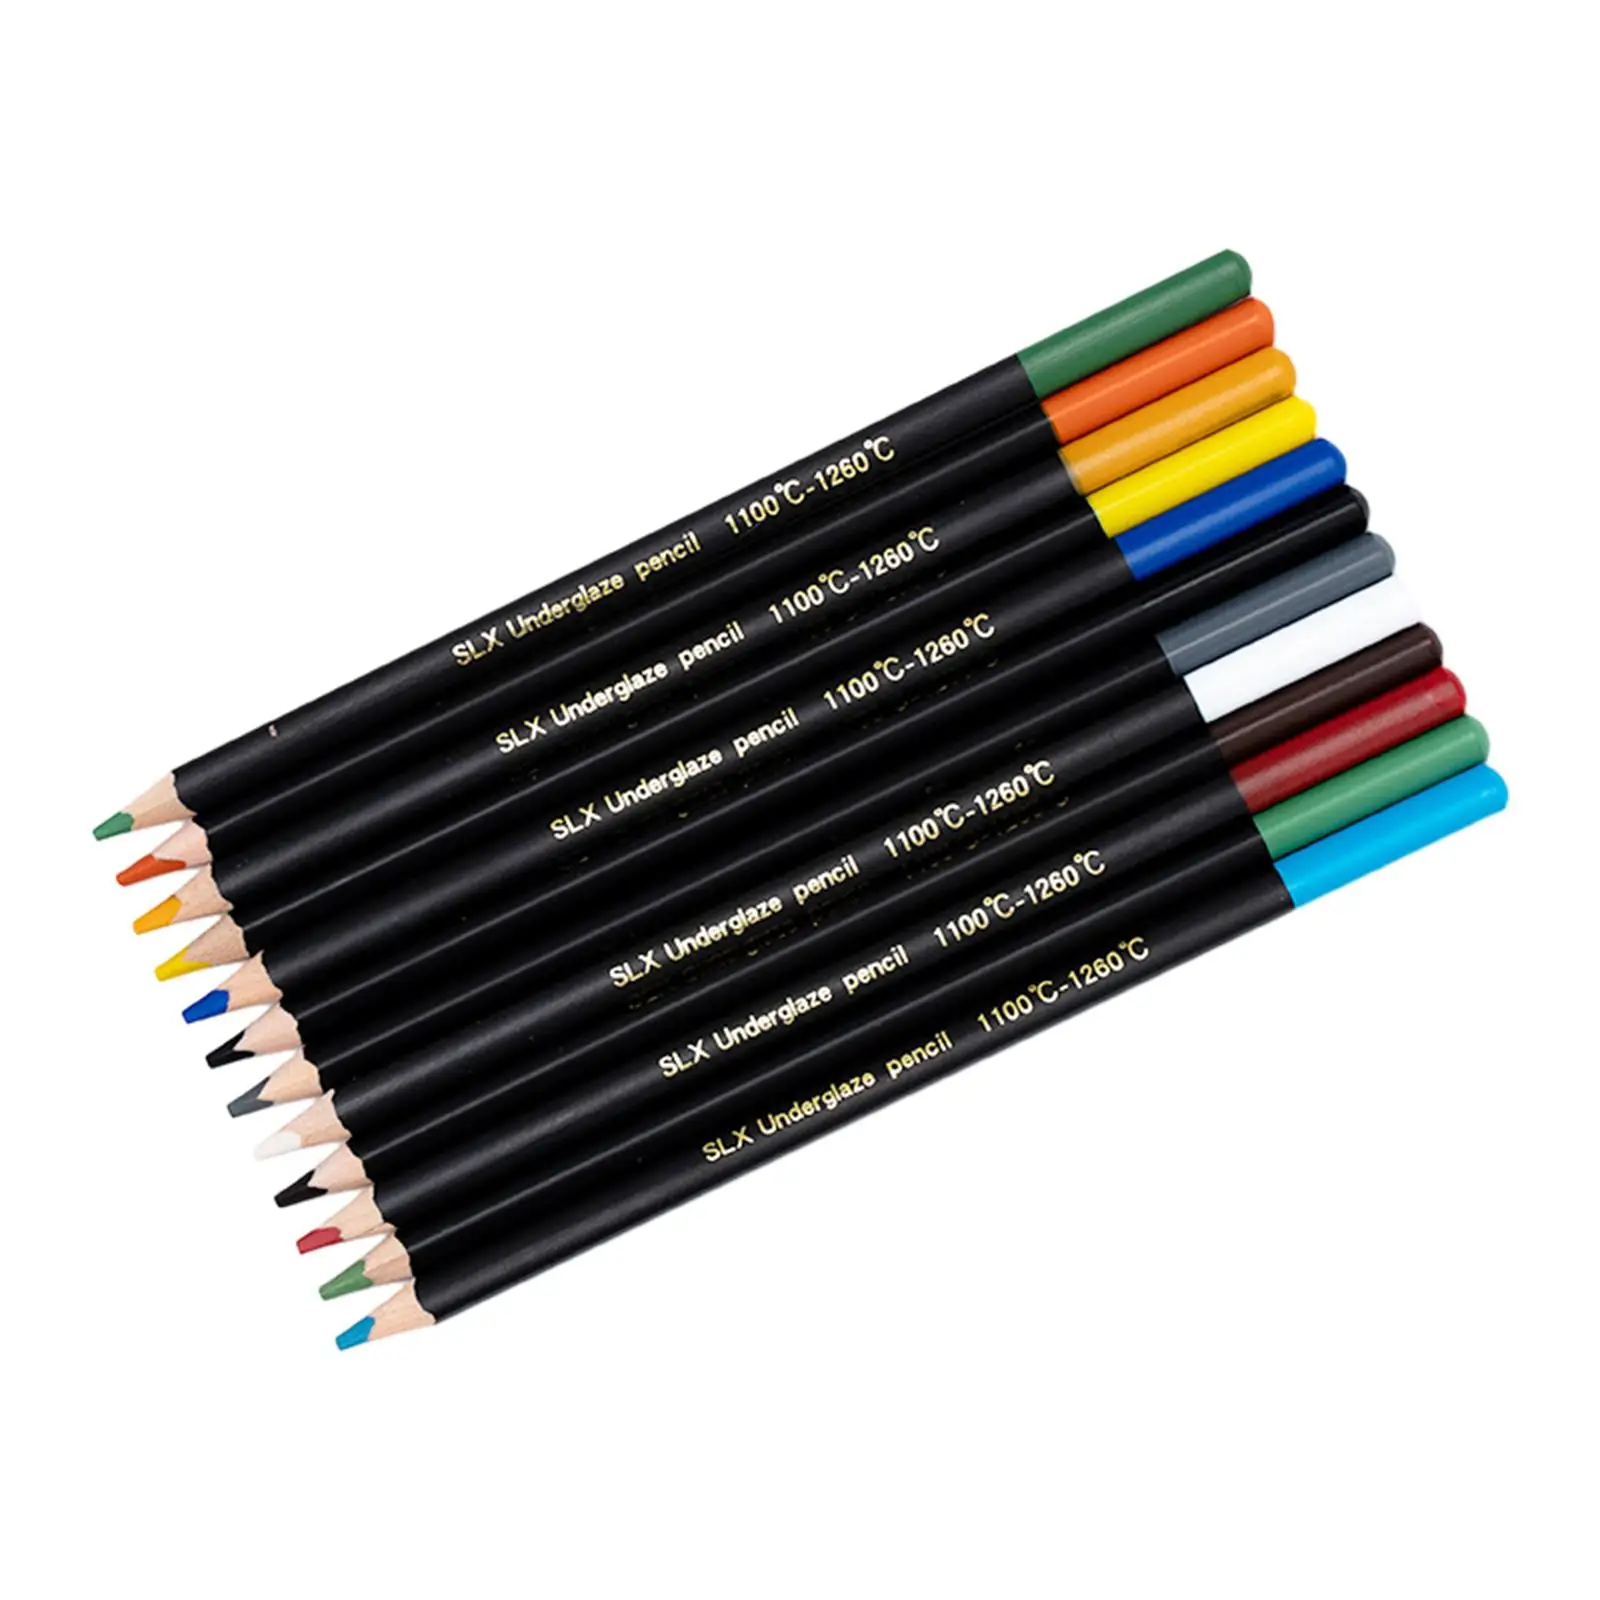 Colored Pencils with Case Professional 12 Count Coloring Pencils Set for Art Craft Supplies Shading Hand Painting Artist Gift